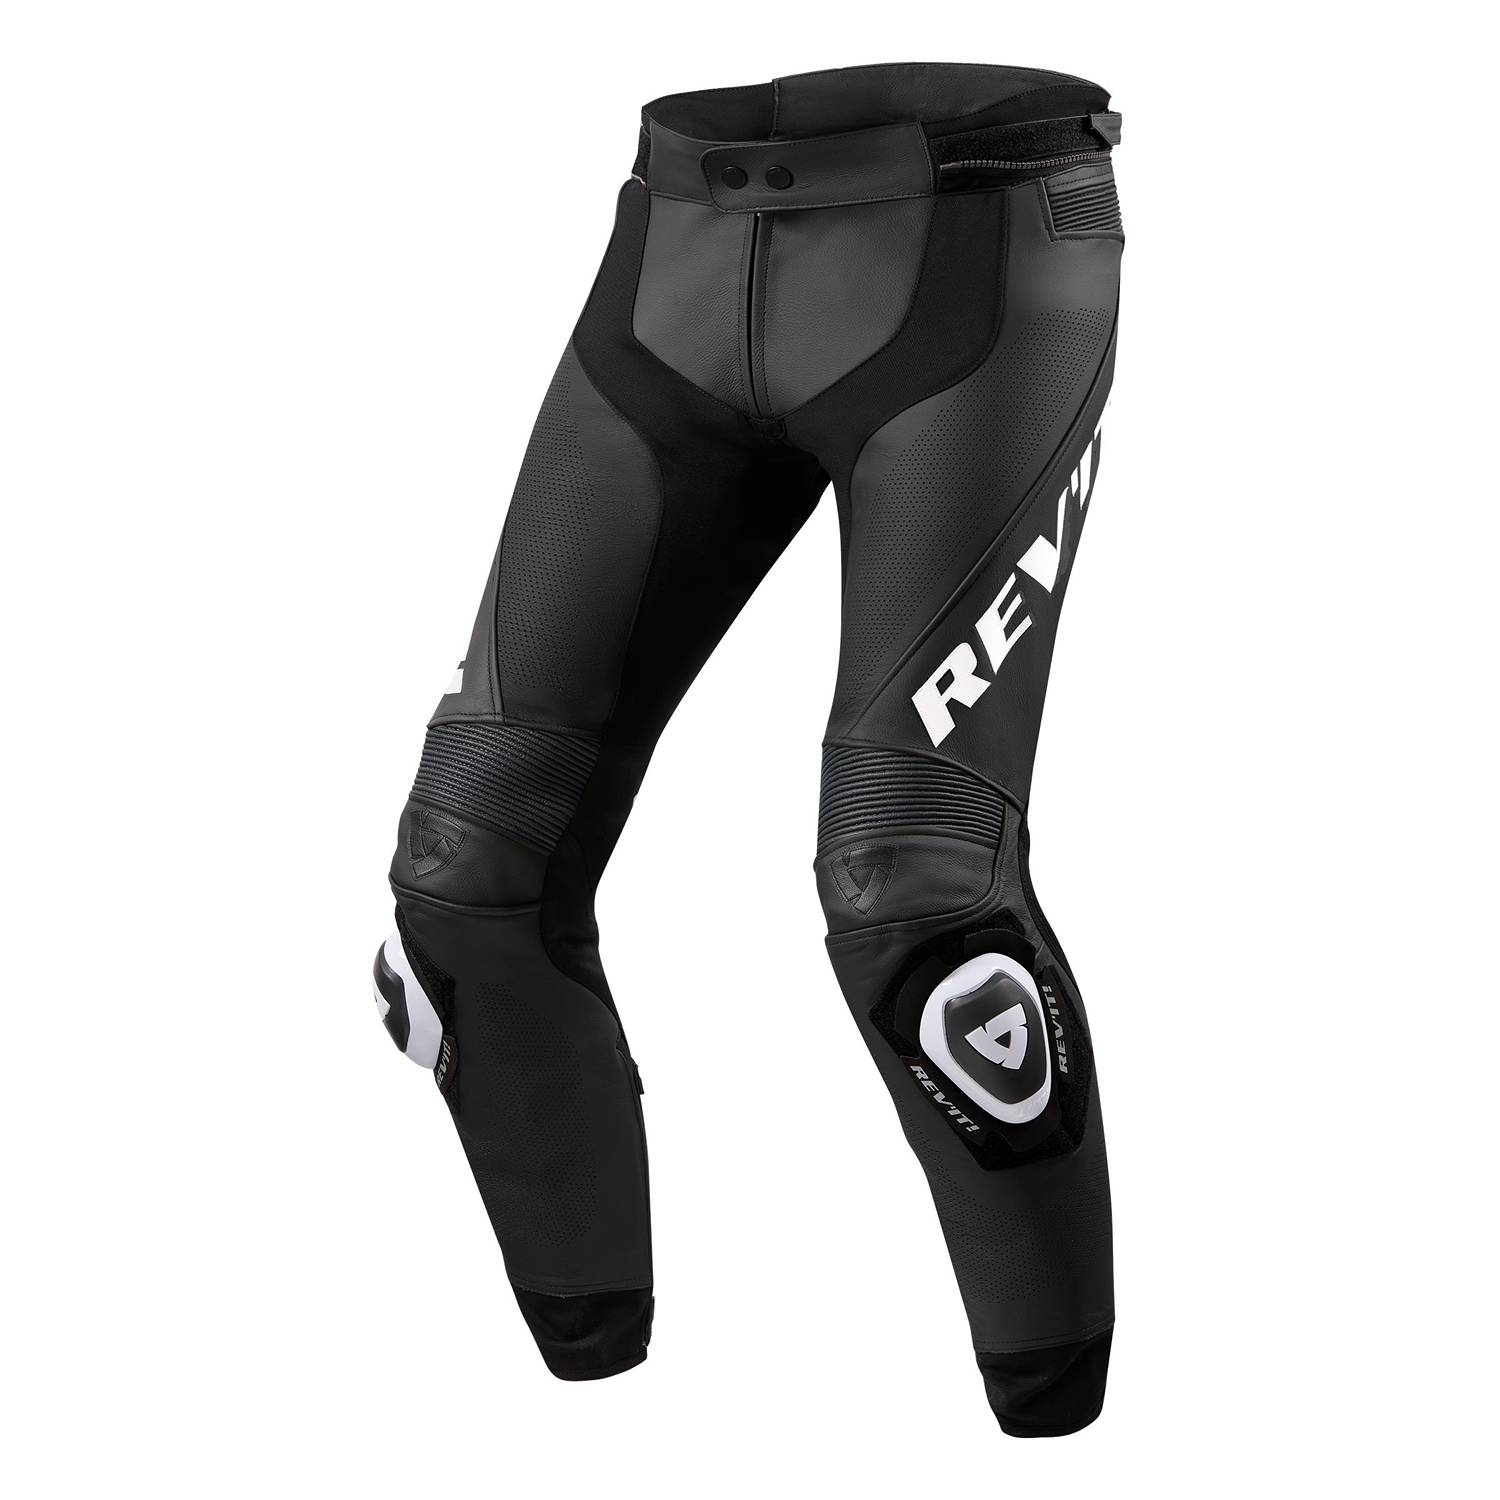 Image of REV'IT! Trousers Apex Black White Short Motorcycle Pants Talla 48